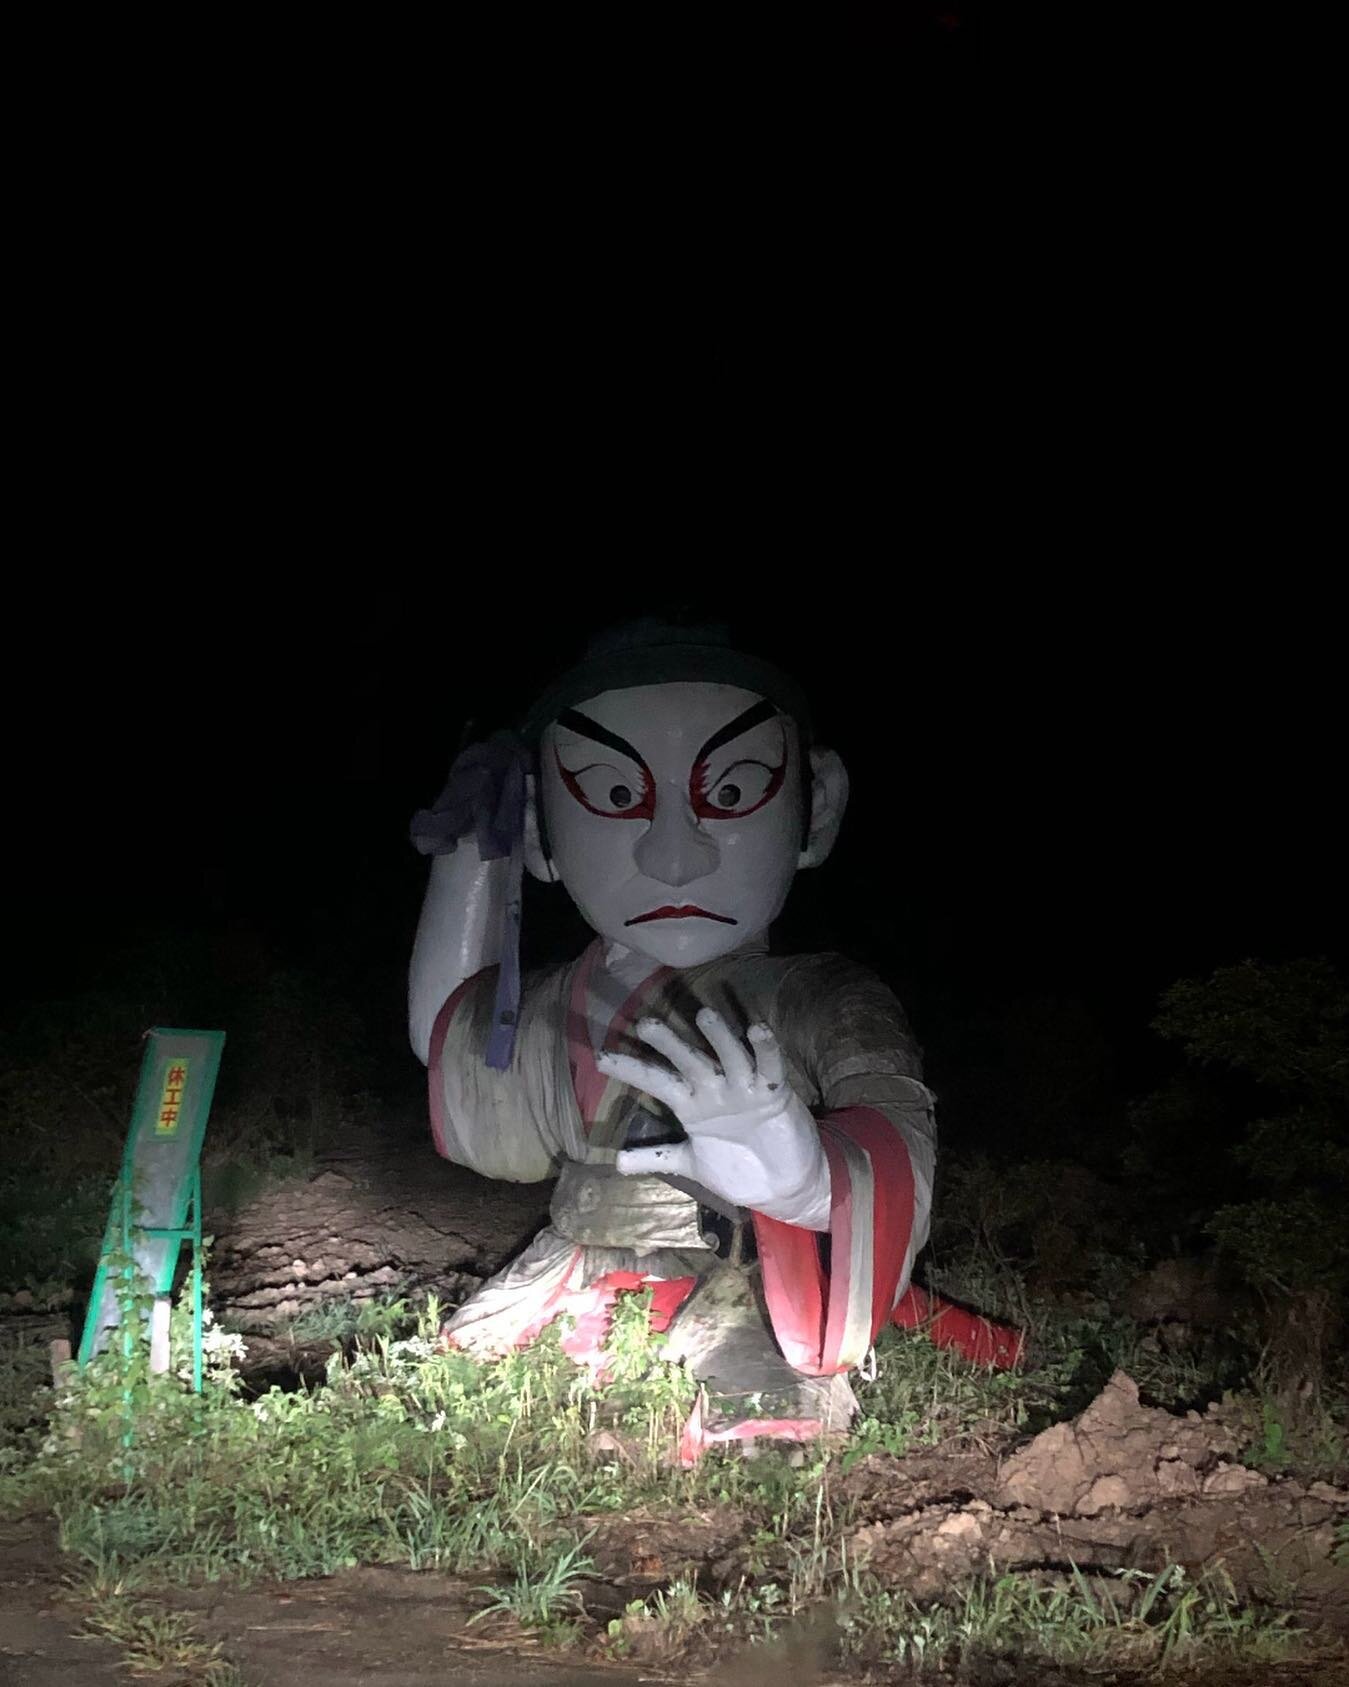 On the drive to my new home in Fukushima, a mysterious figure appeared in the darkness. I turned to my new supervisor and asked &ldquo;それはなんですか&rdquo; meaning &ldquo;what is that?&rdquo;. My supervisor started laughing and said &ldquo;Şen Sensei, h